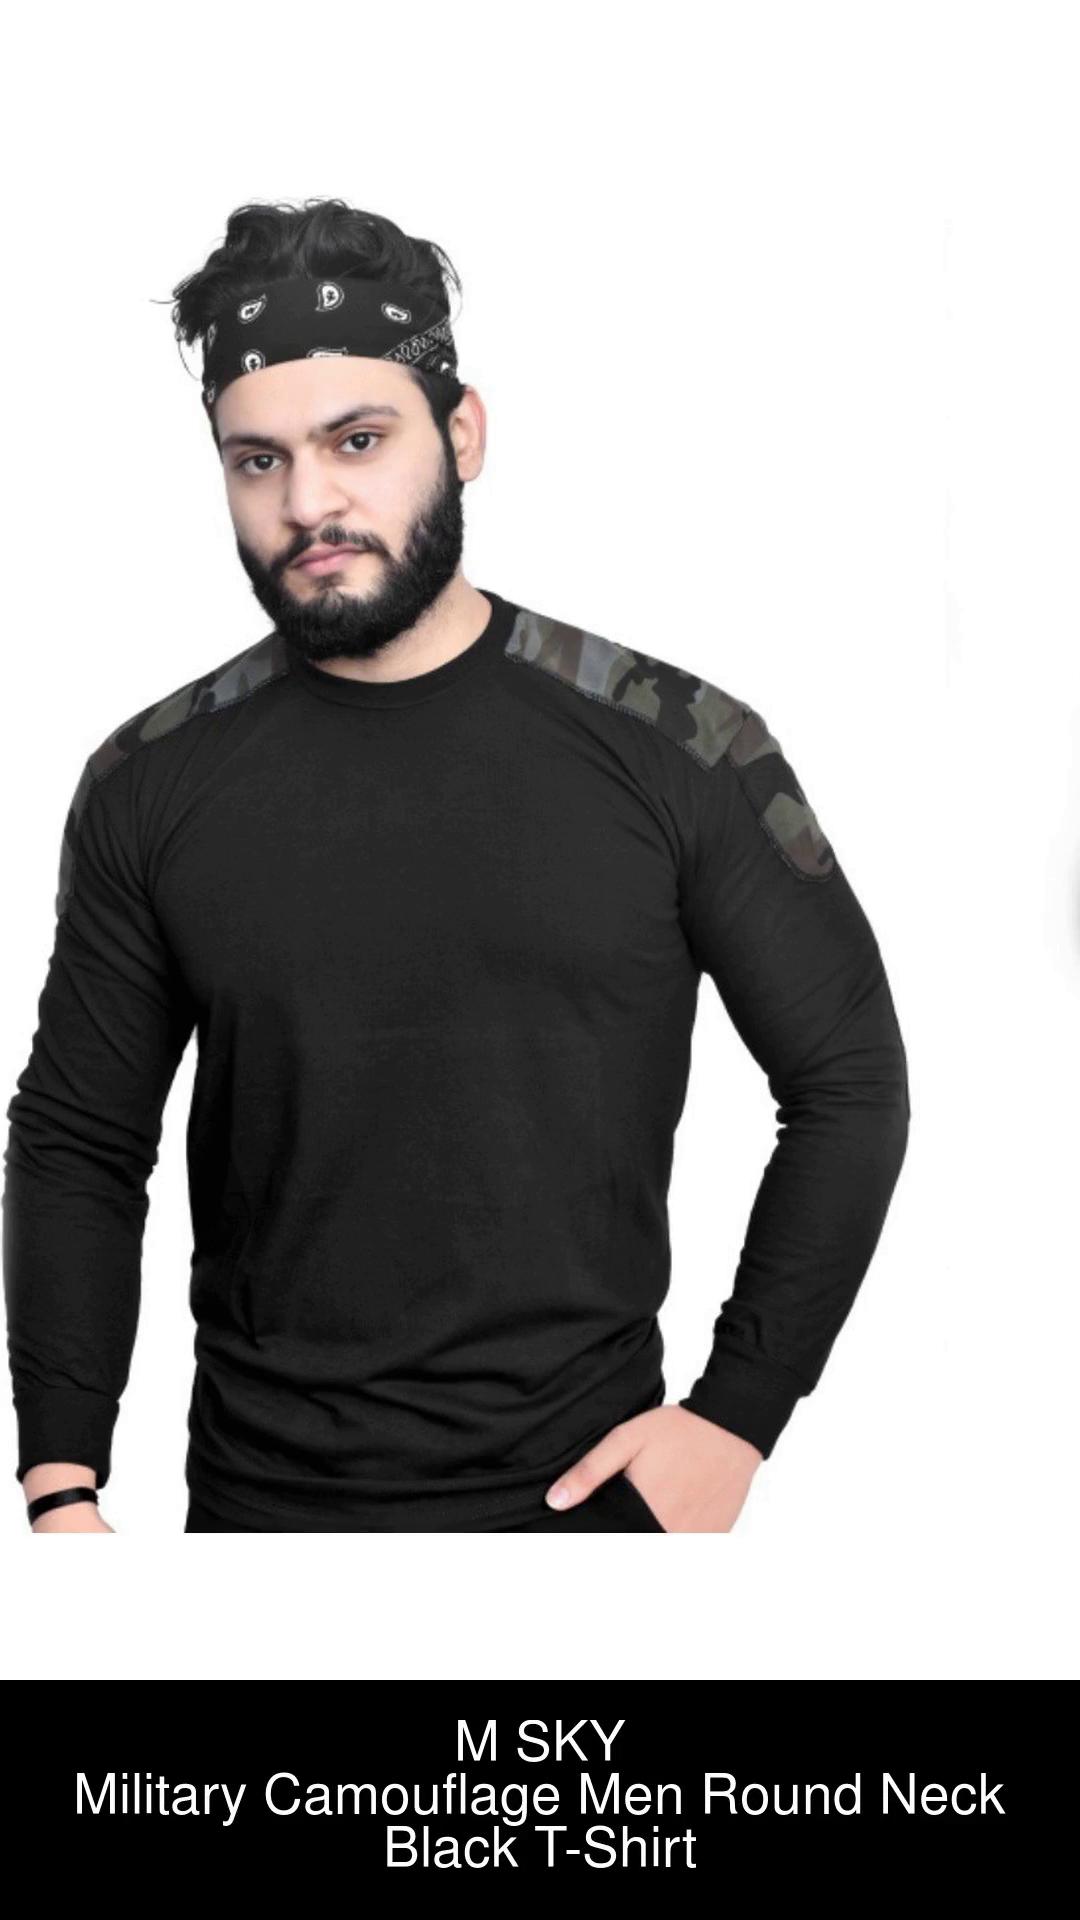 M SKY Military Camouflage Men Round Neck Black T-Shirt - Buy M SKY Military  Camouflage Men Round Neck Black T-Shirt Online at Best Prices in India